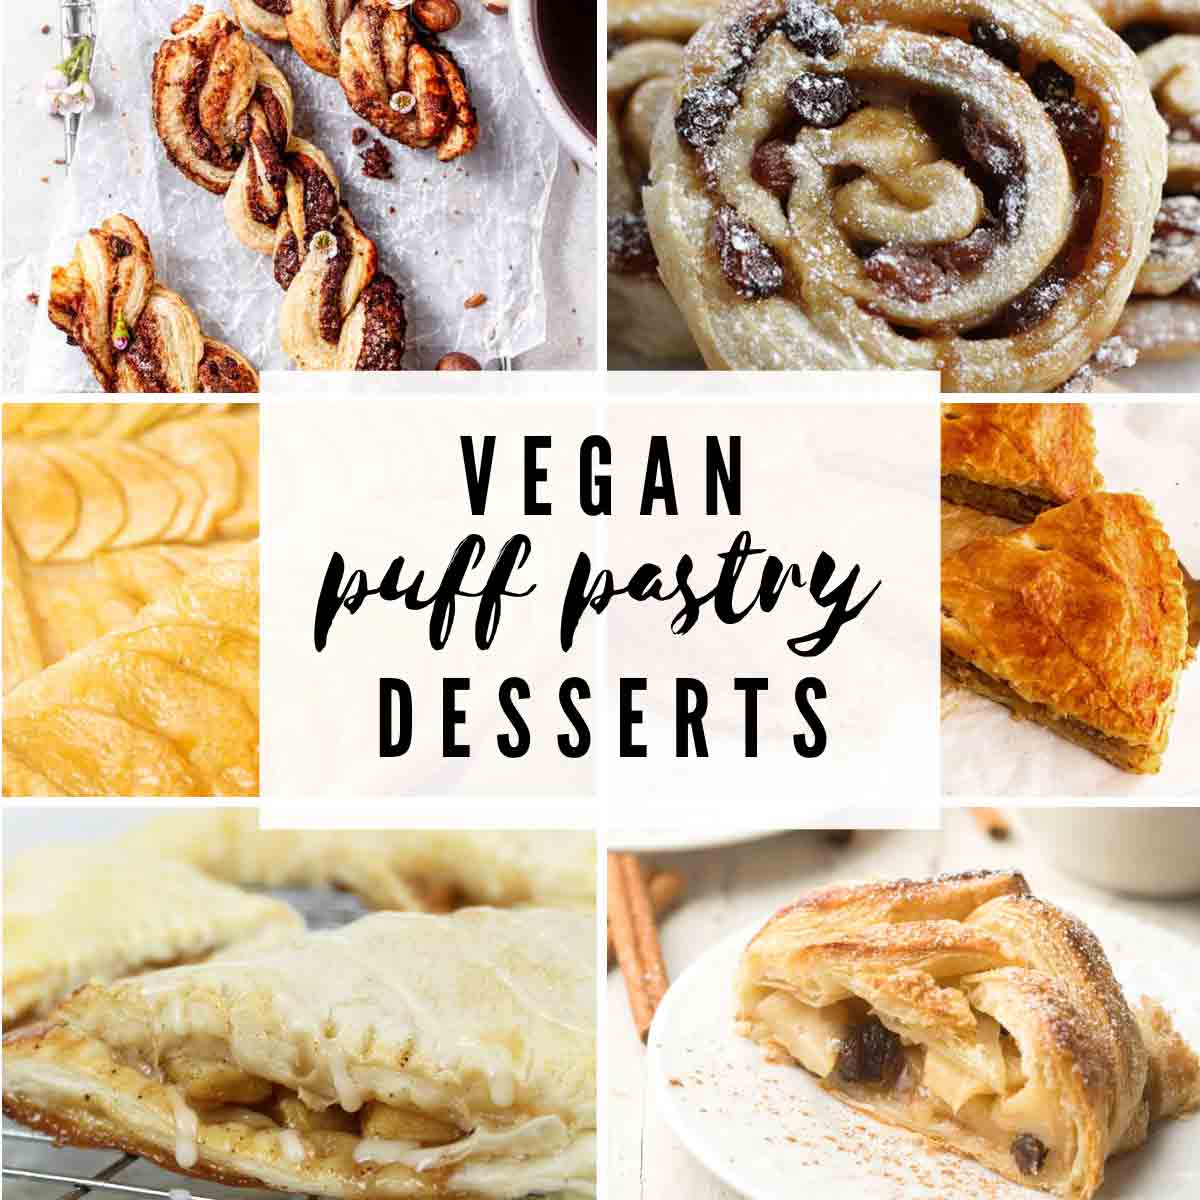 6 Images Of Vegan Desserts With Puff Pastry